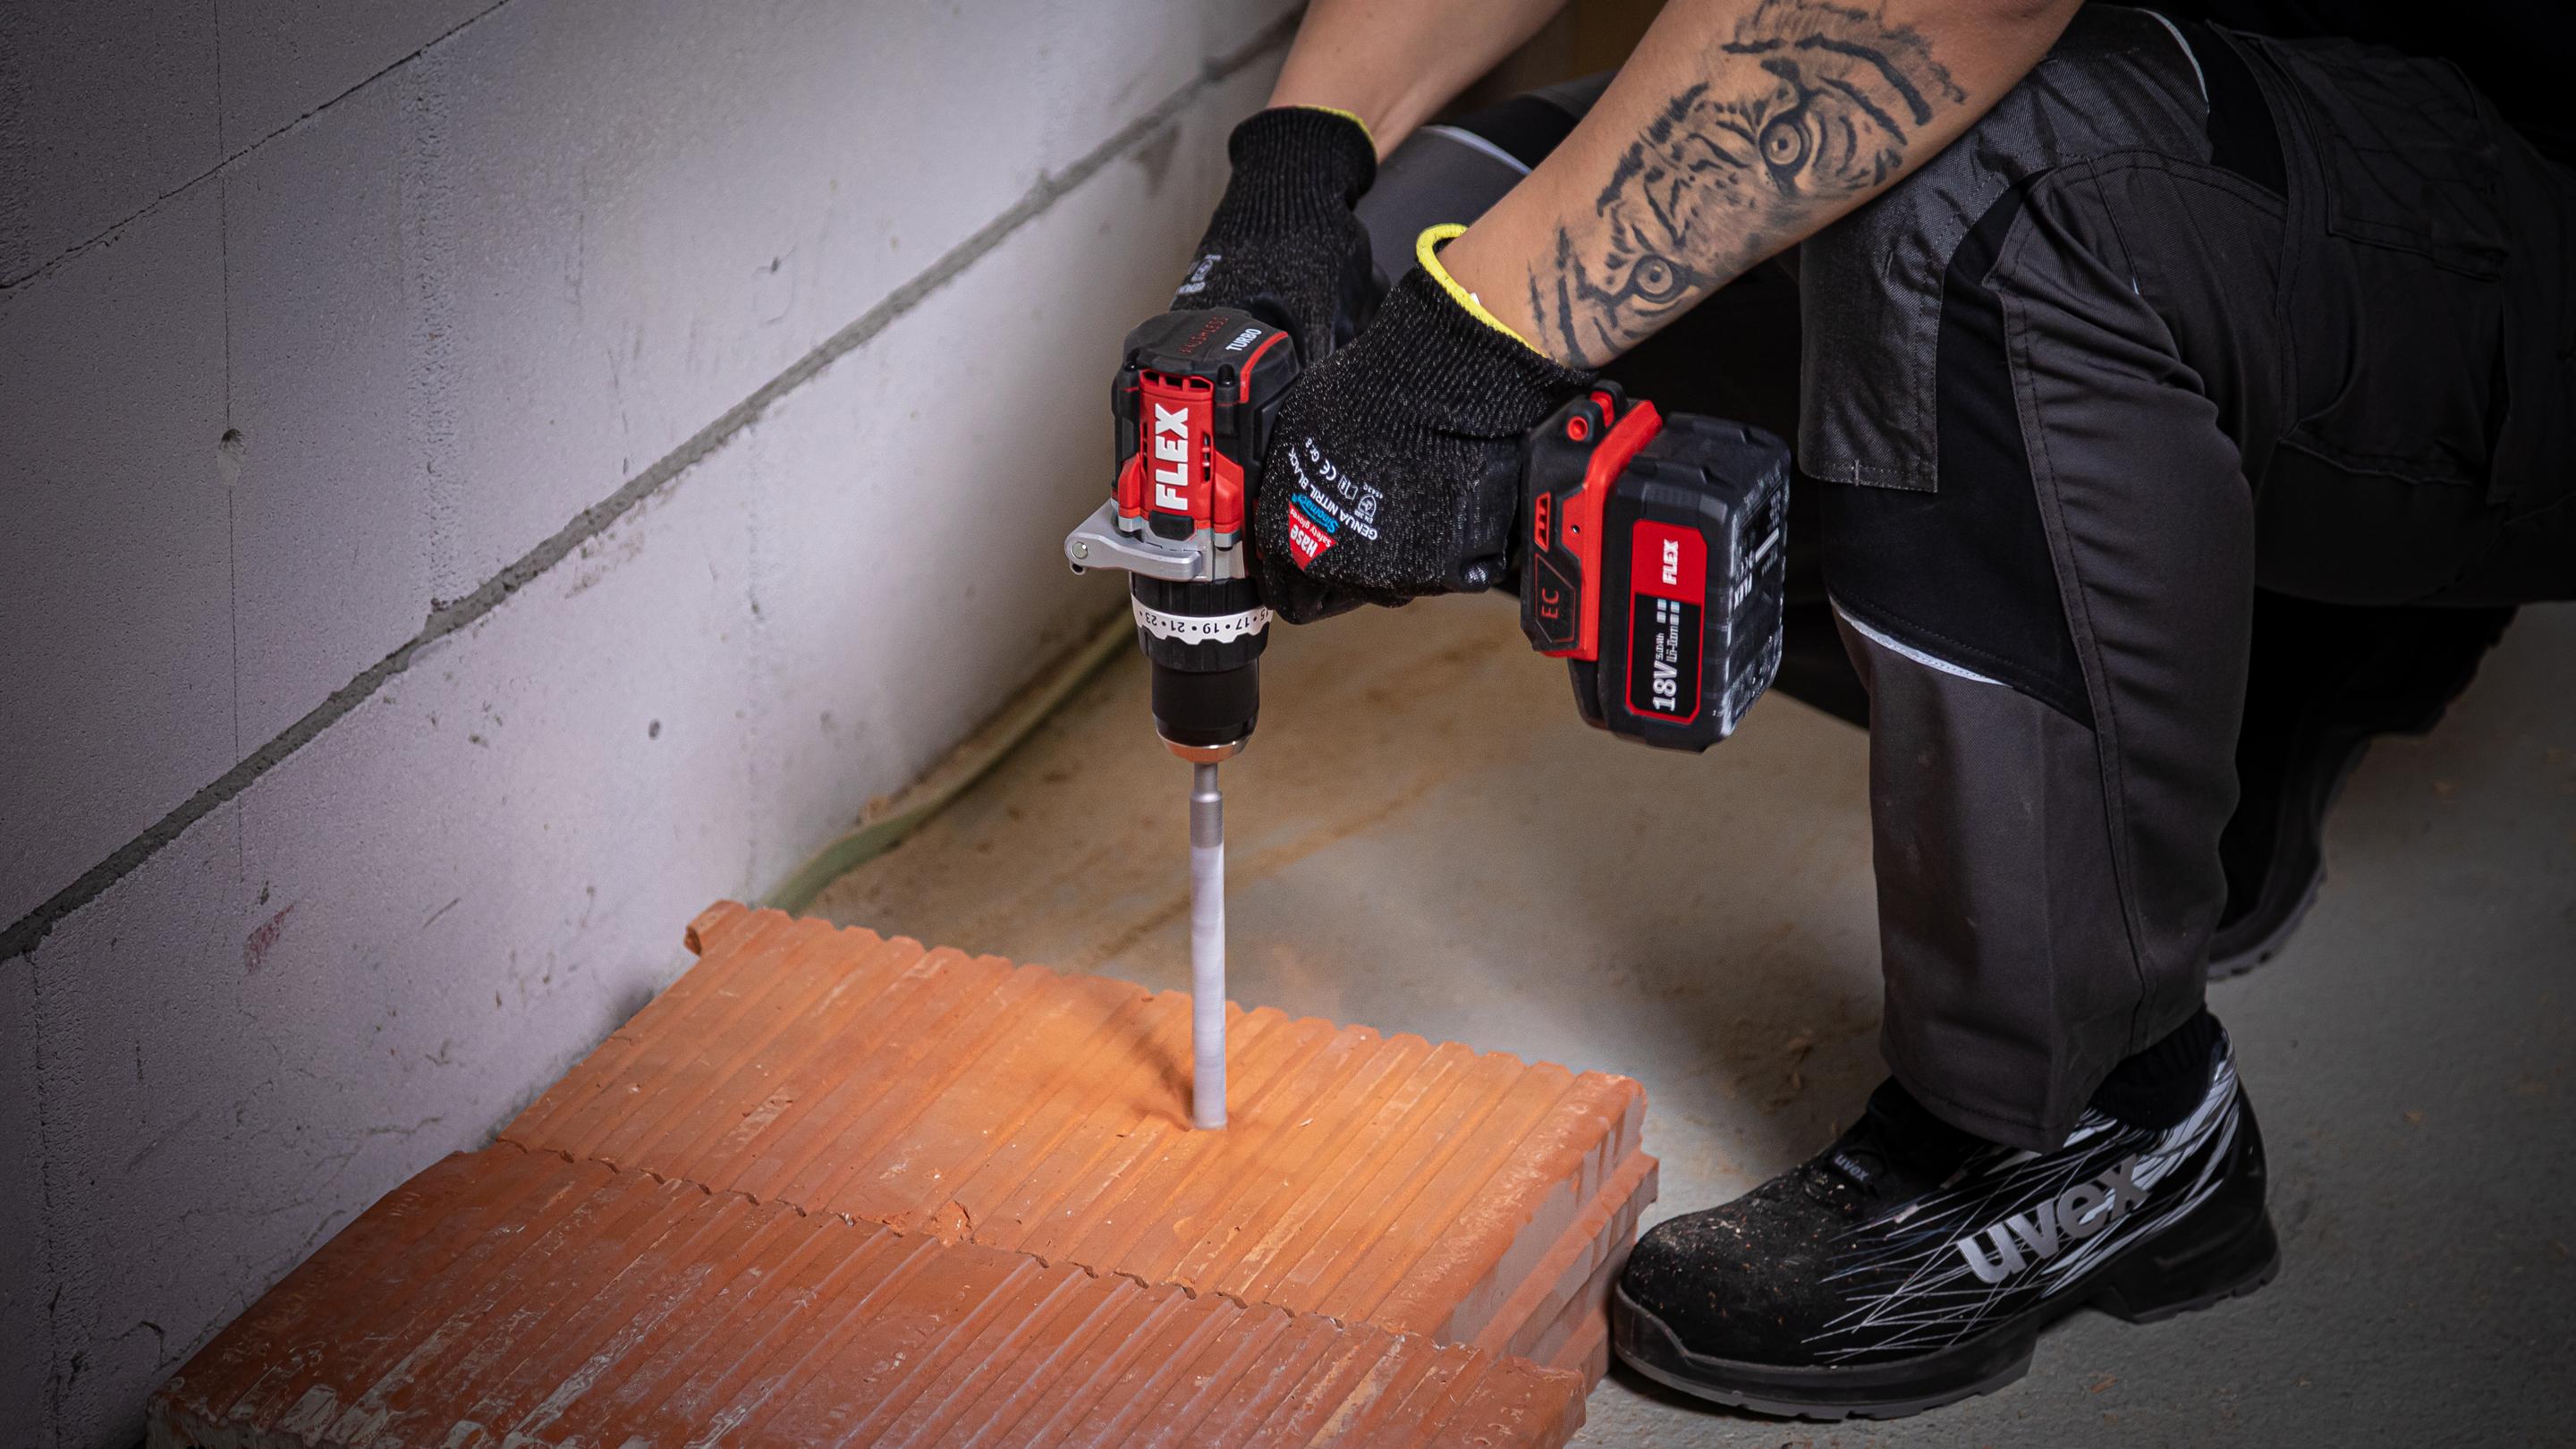 Drilling in brick with FLEX impact drill with turbo mode PD 2G 18.0 HD